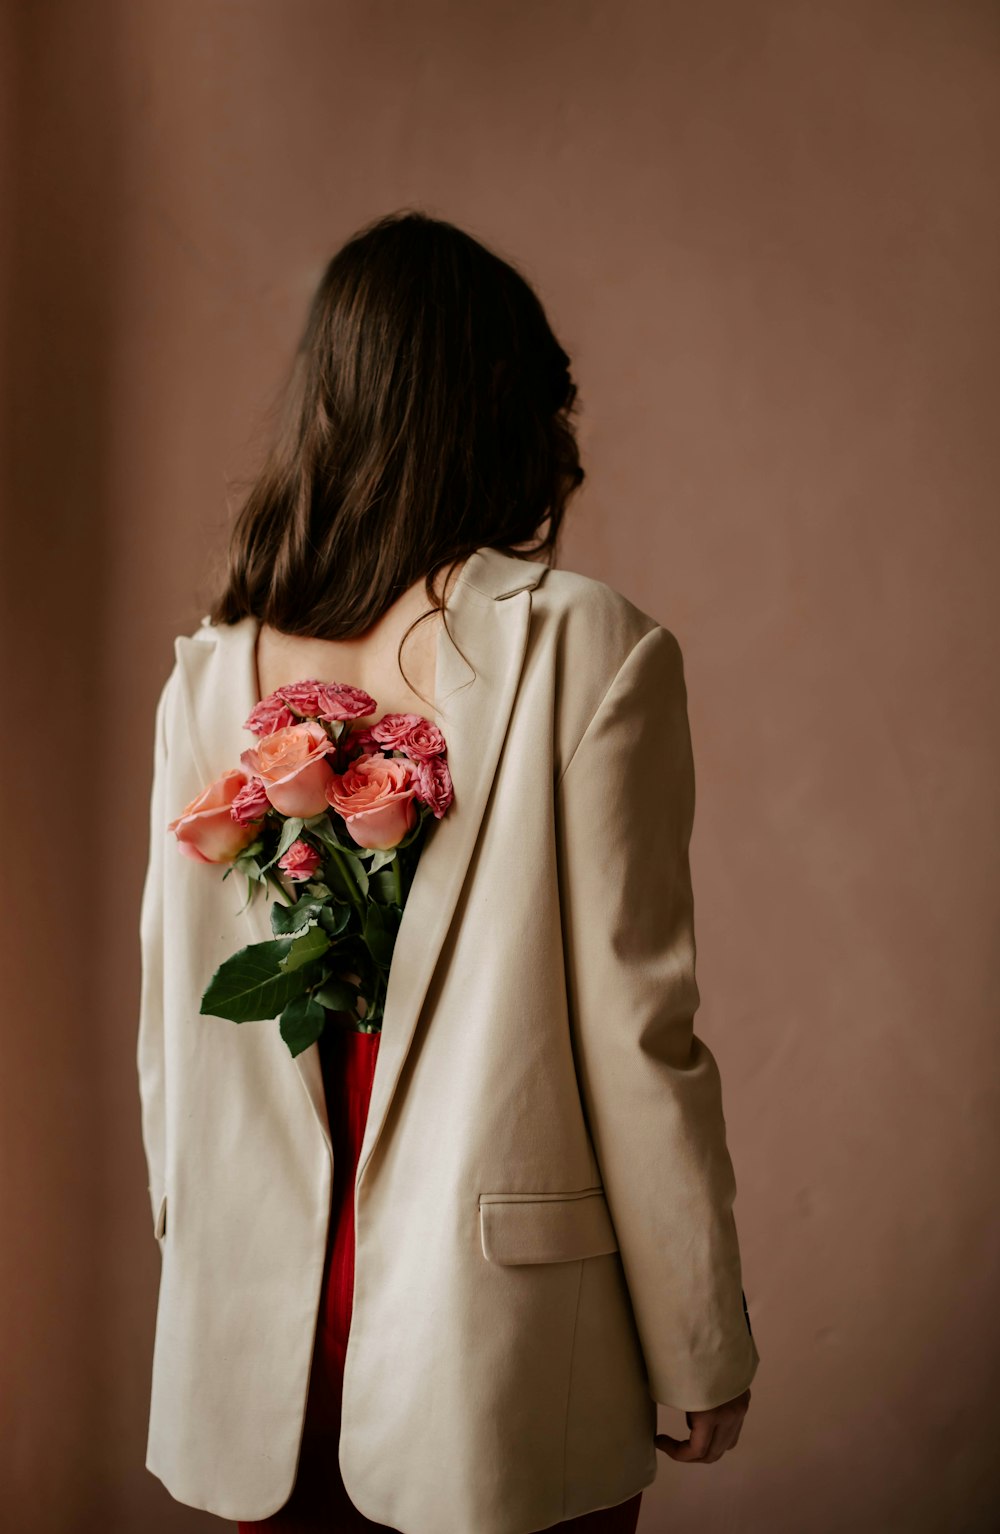 a woman in a suit holding a bouquet of flowers